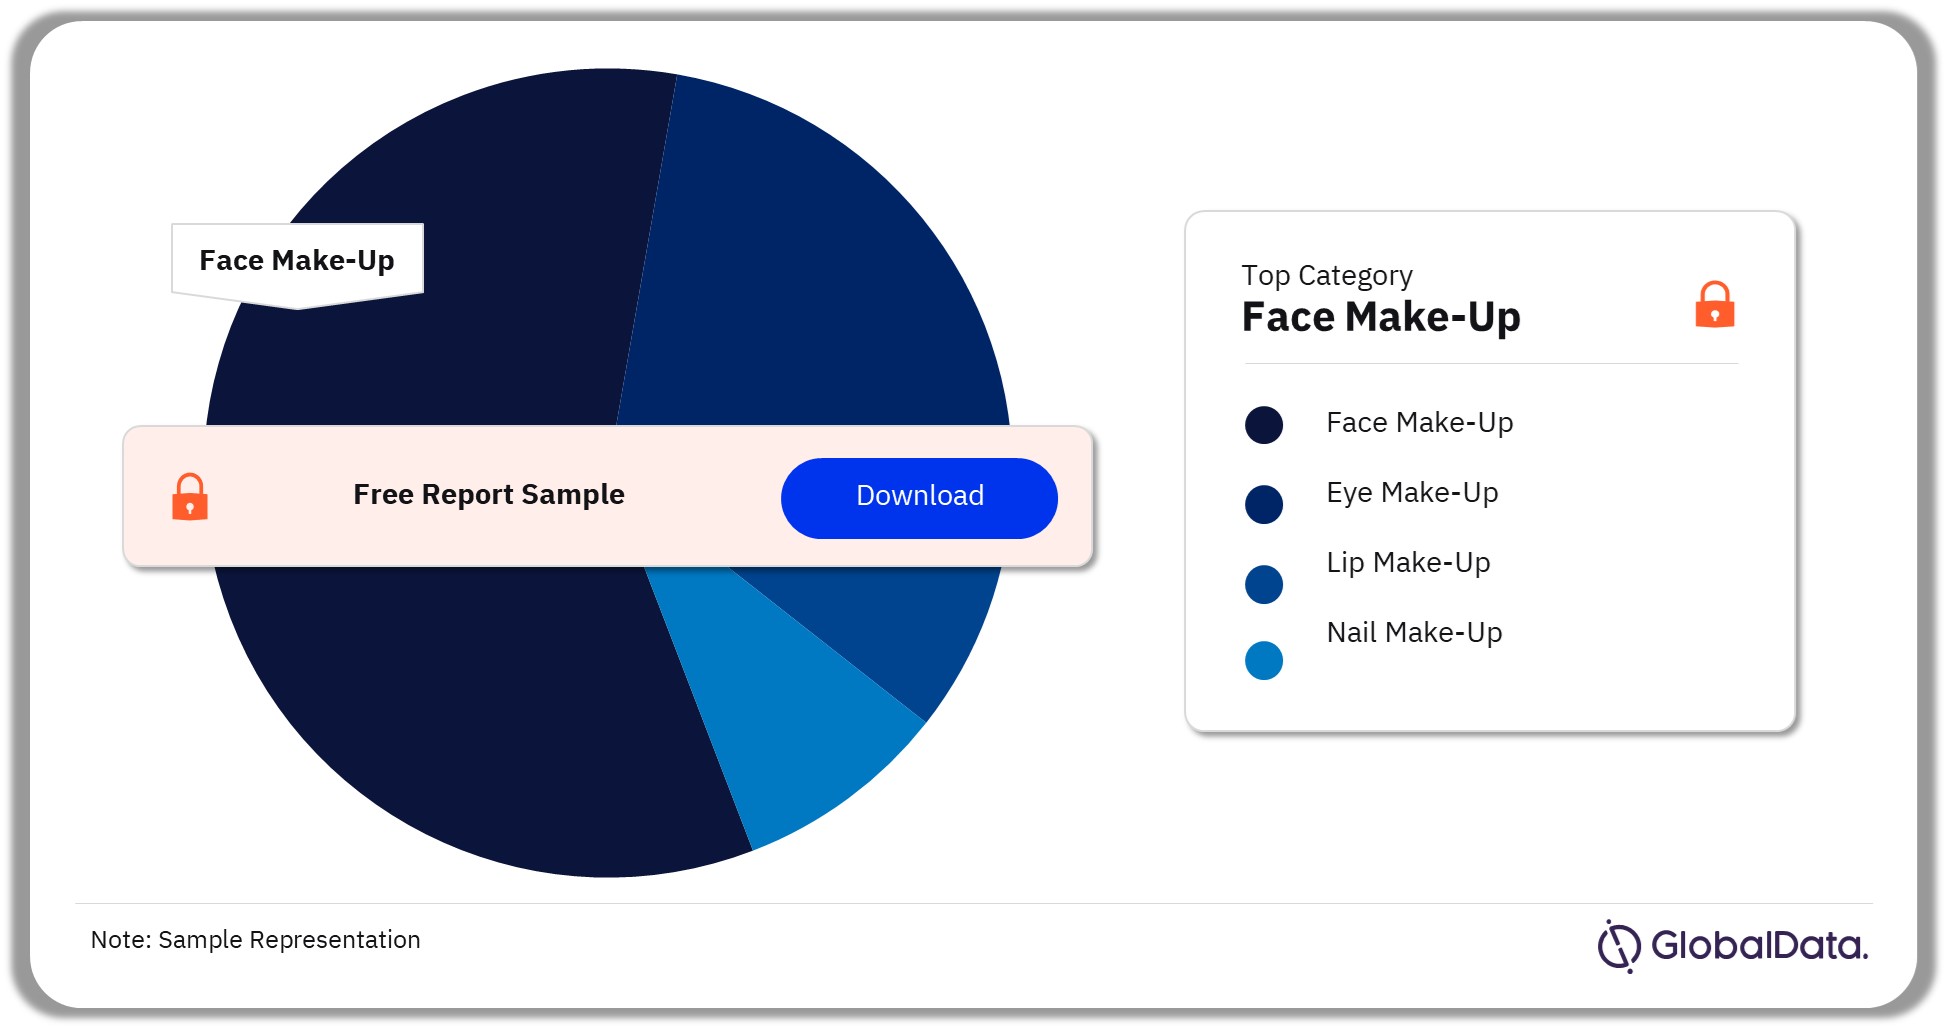 South Korea Make-up Market Analysis, by Categories, 2021 (%)